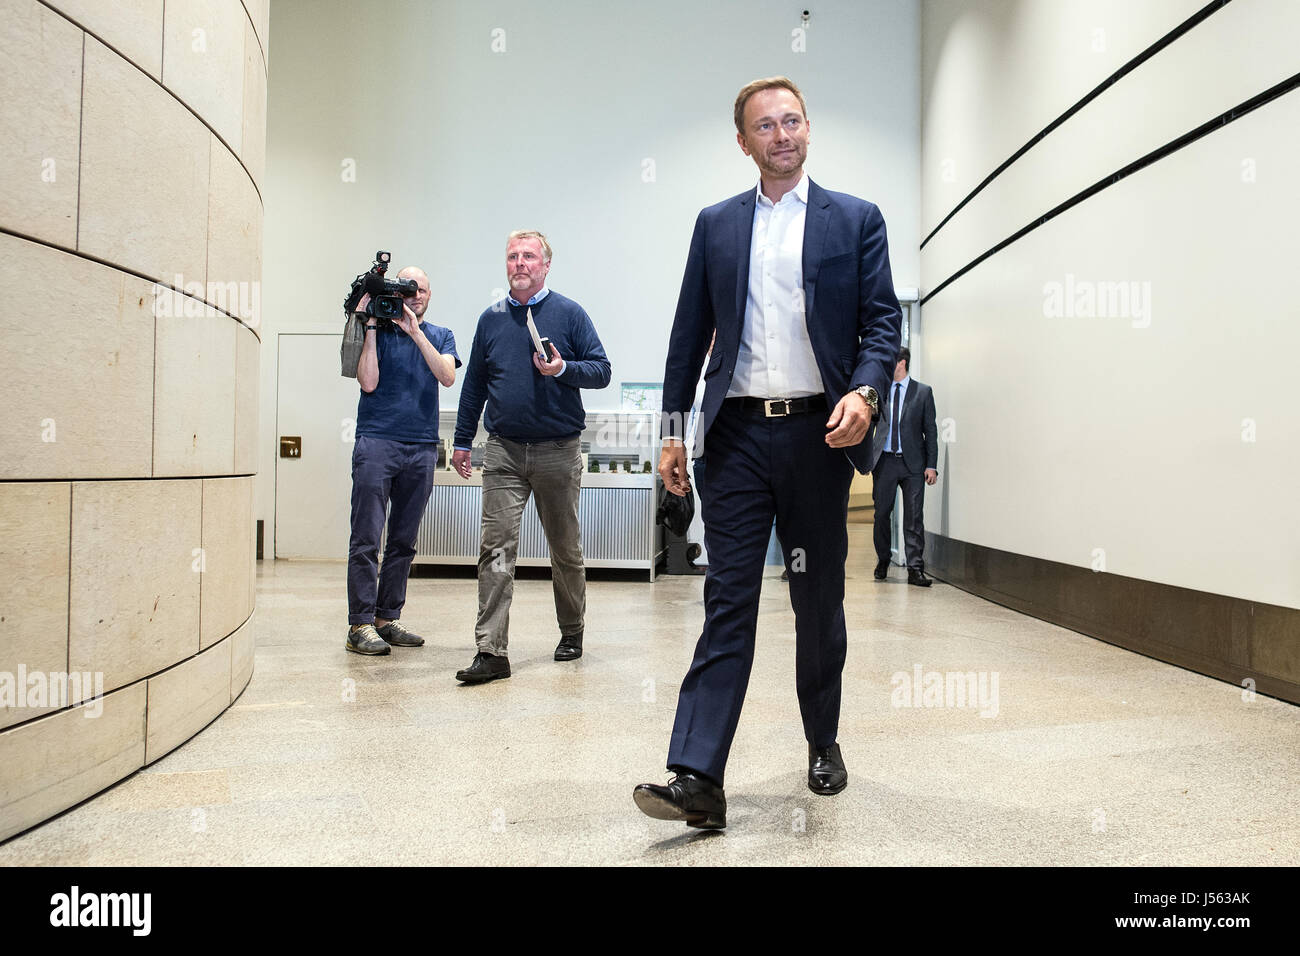 The leader of the liberal FDP Christian Lindner in Duesseldorf, Germany, 16 May 2017. The CDU and FDP have agreed to meet for coalition talks though a firm date has not yet been set. Photo: Federico Gambarini/dpa Stock Photo